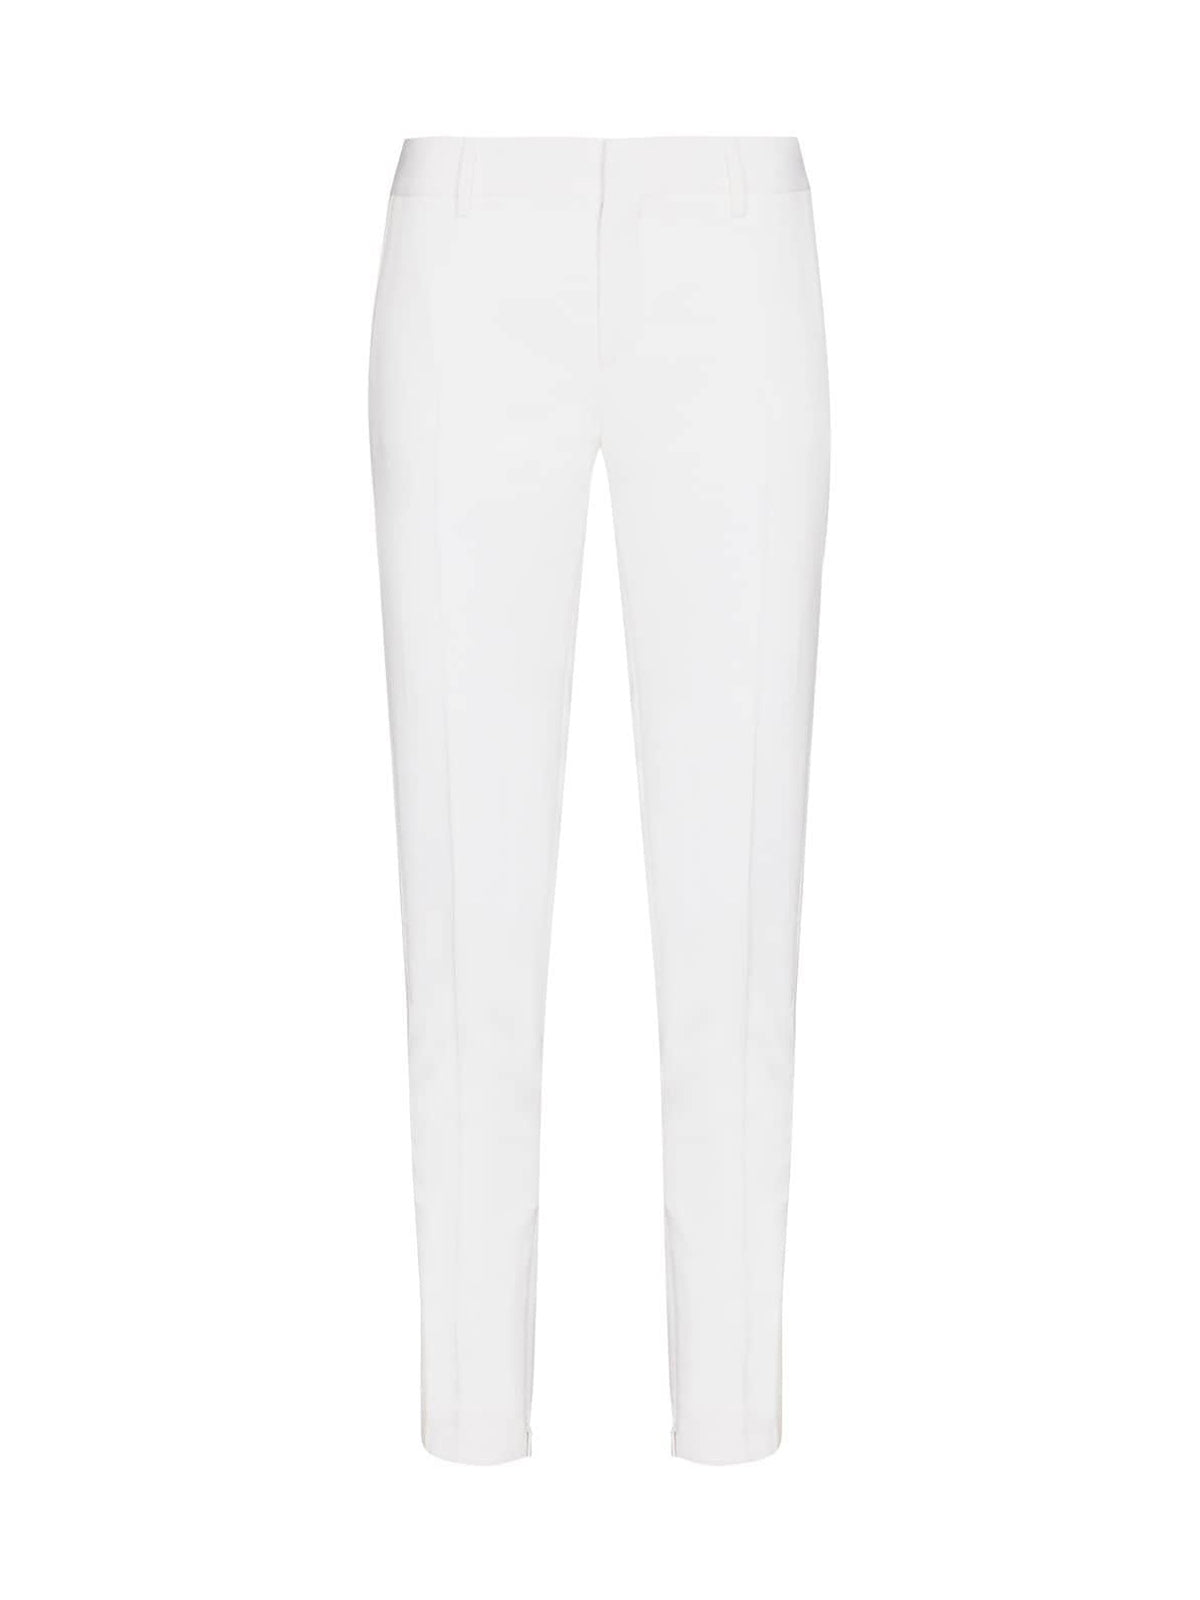 Slim trousers with front pleats